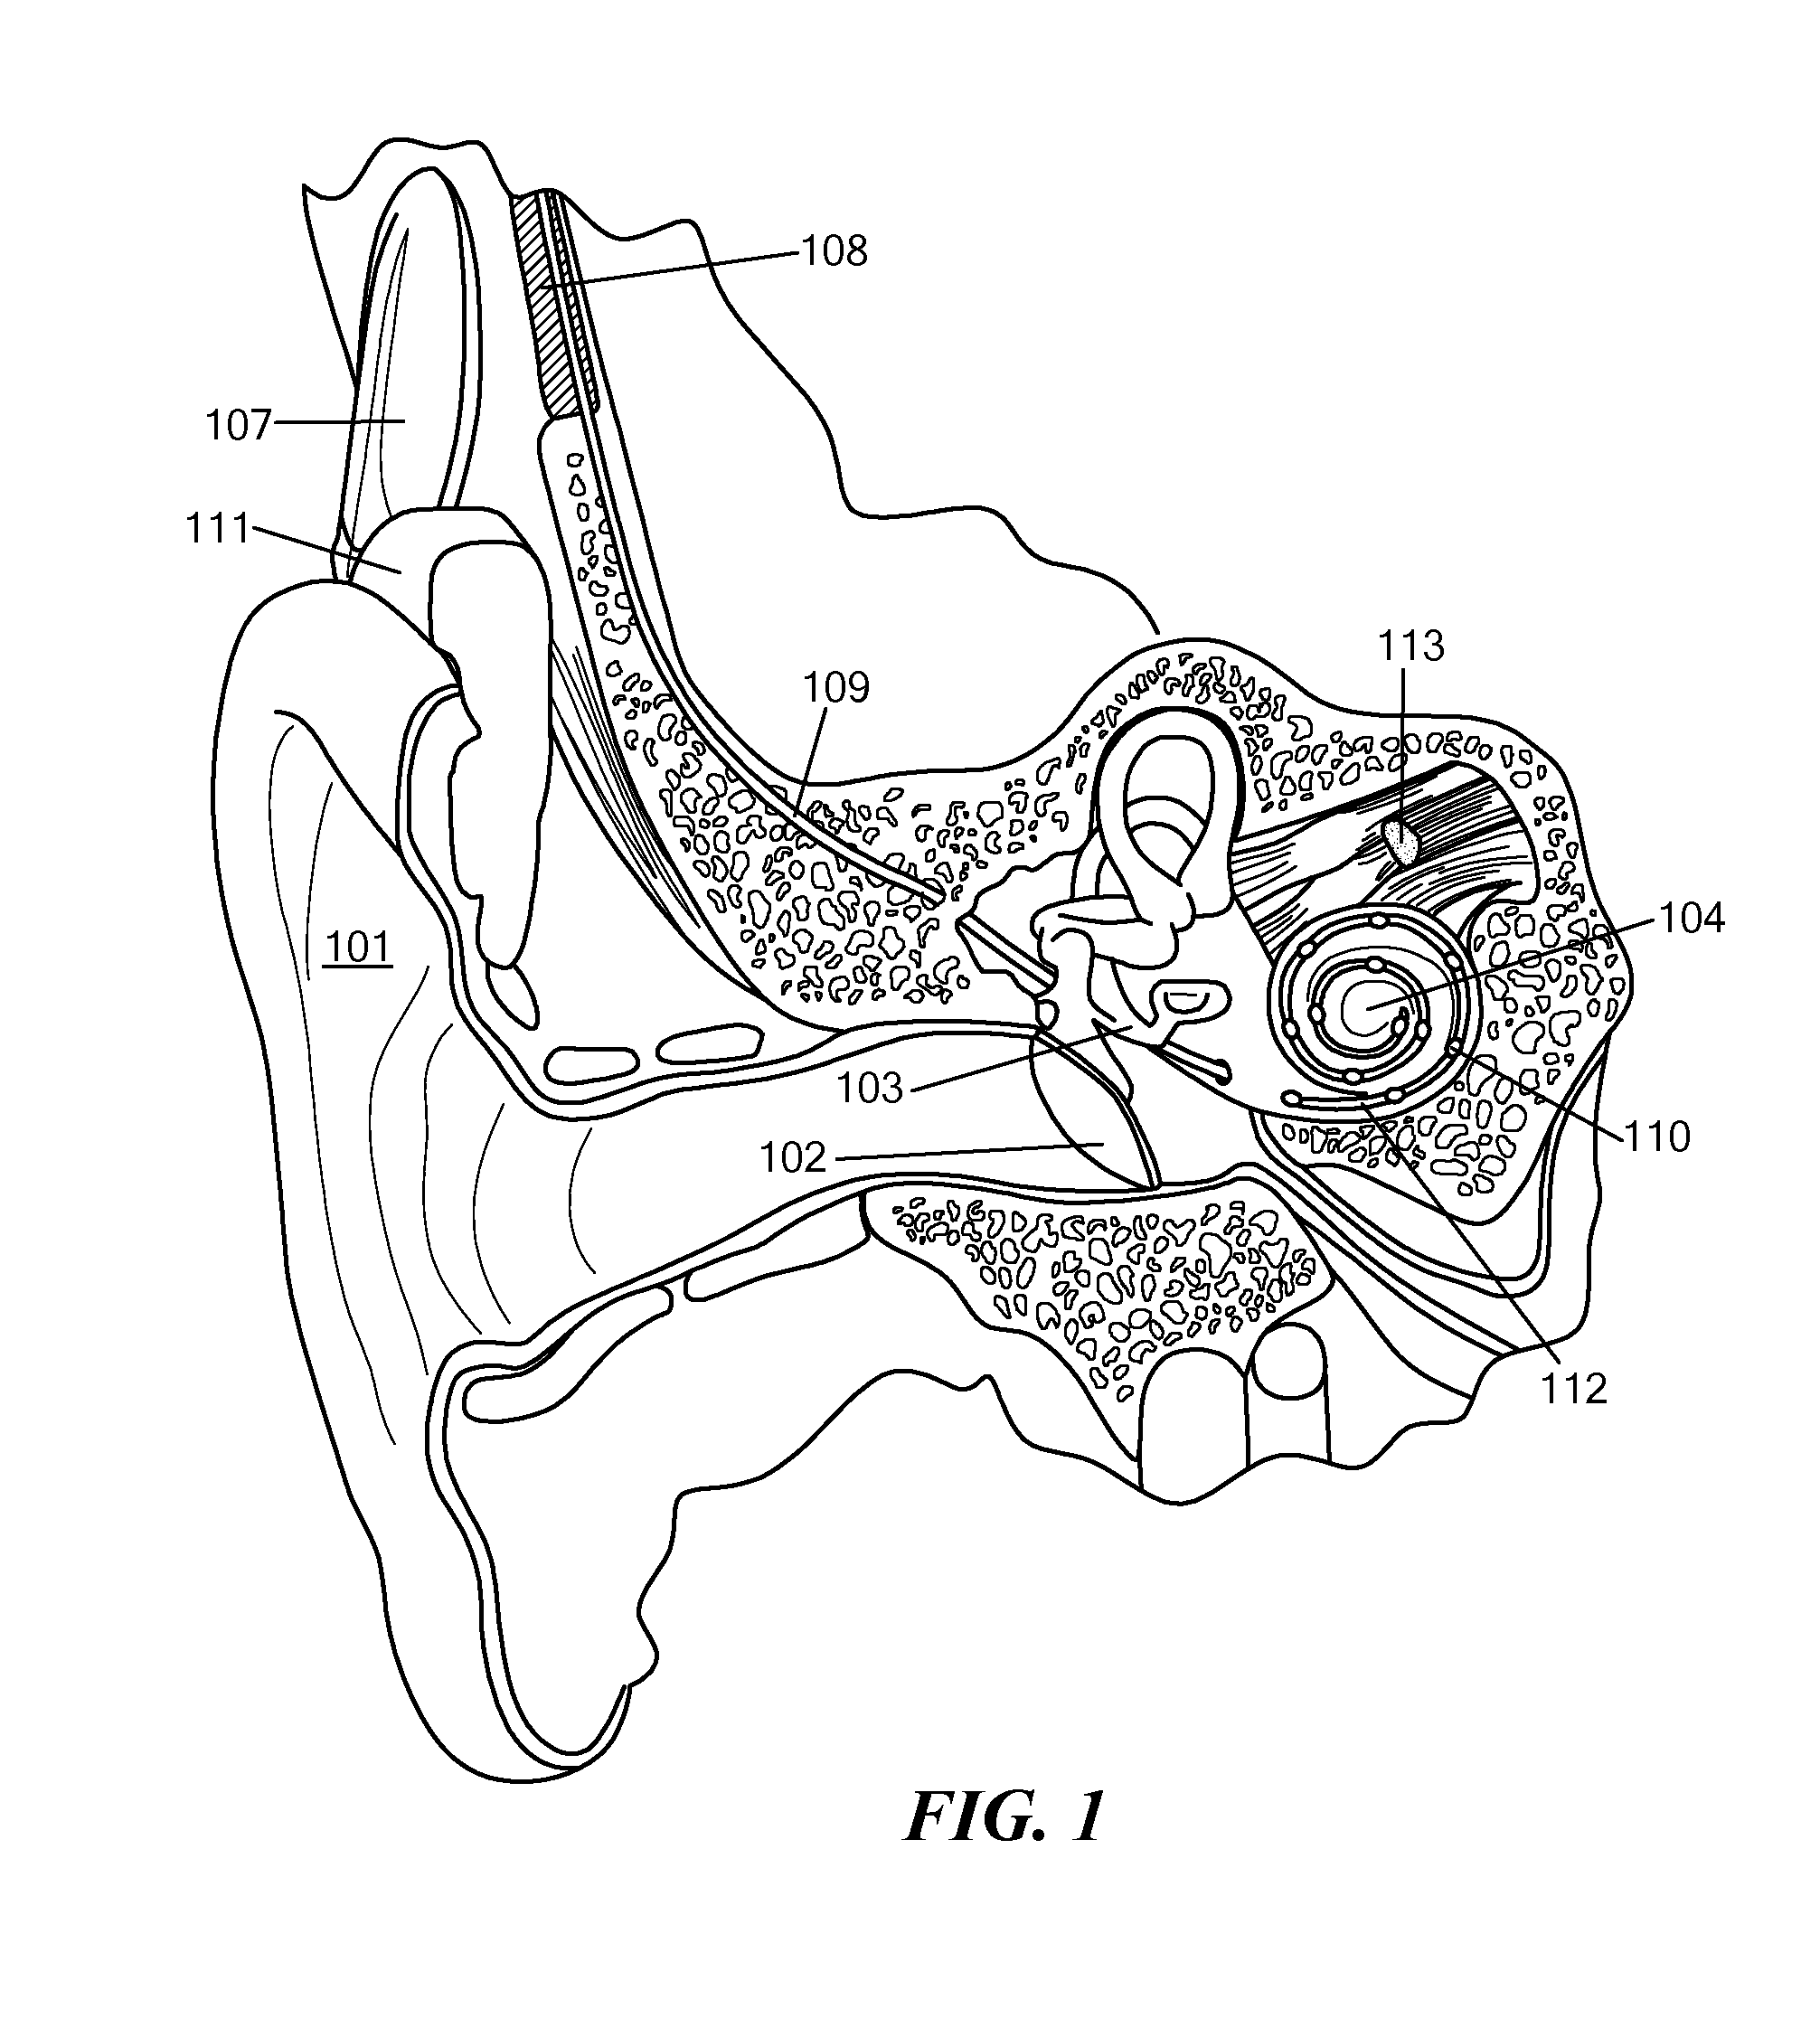 Enhancing Fine Time Structure Transmission for Hearing Implant System